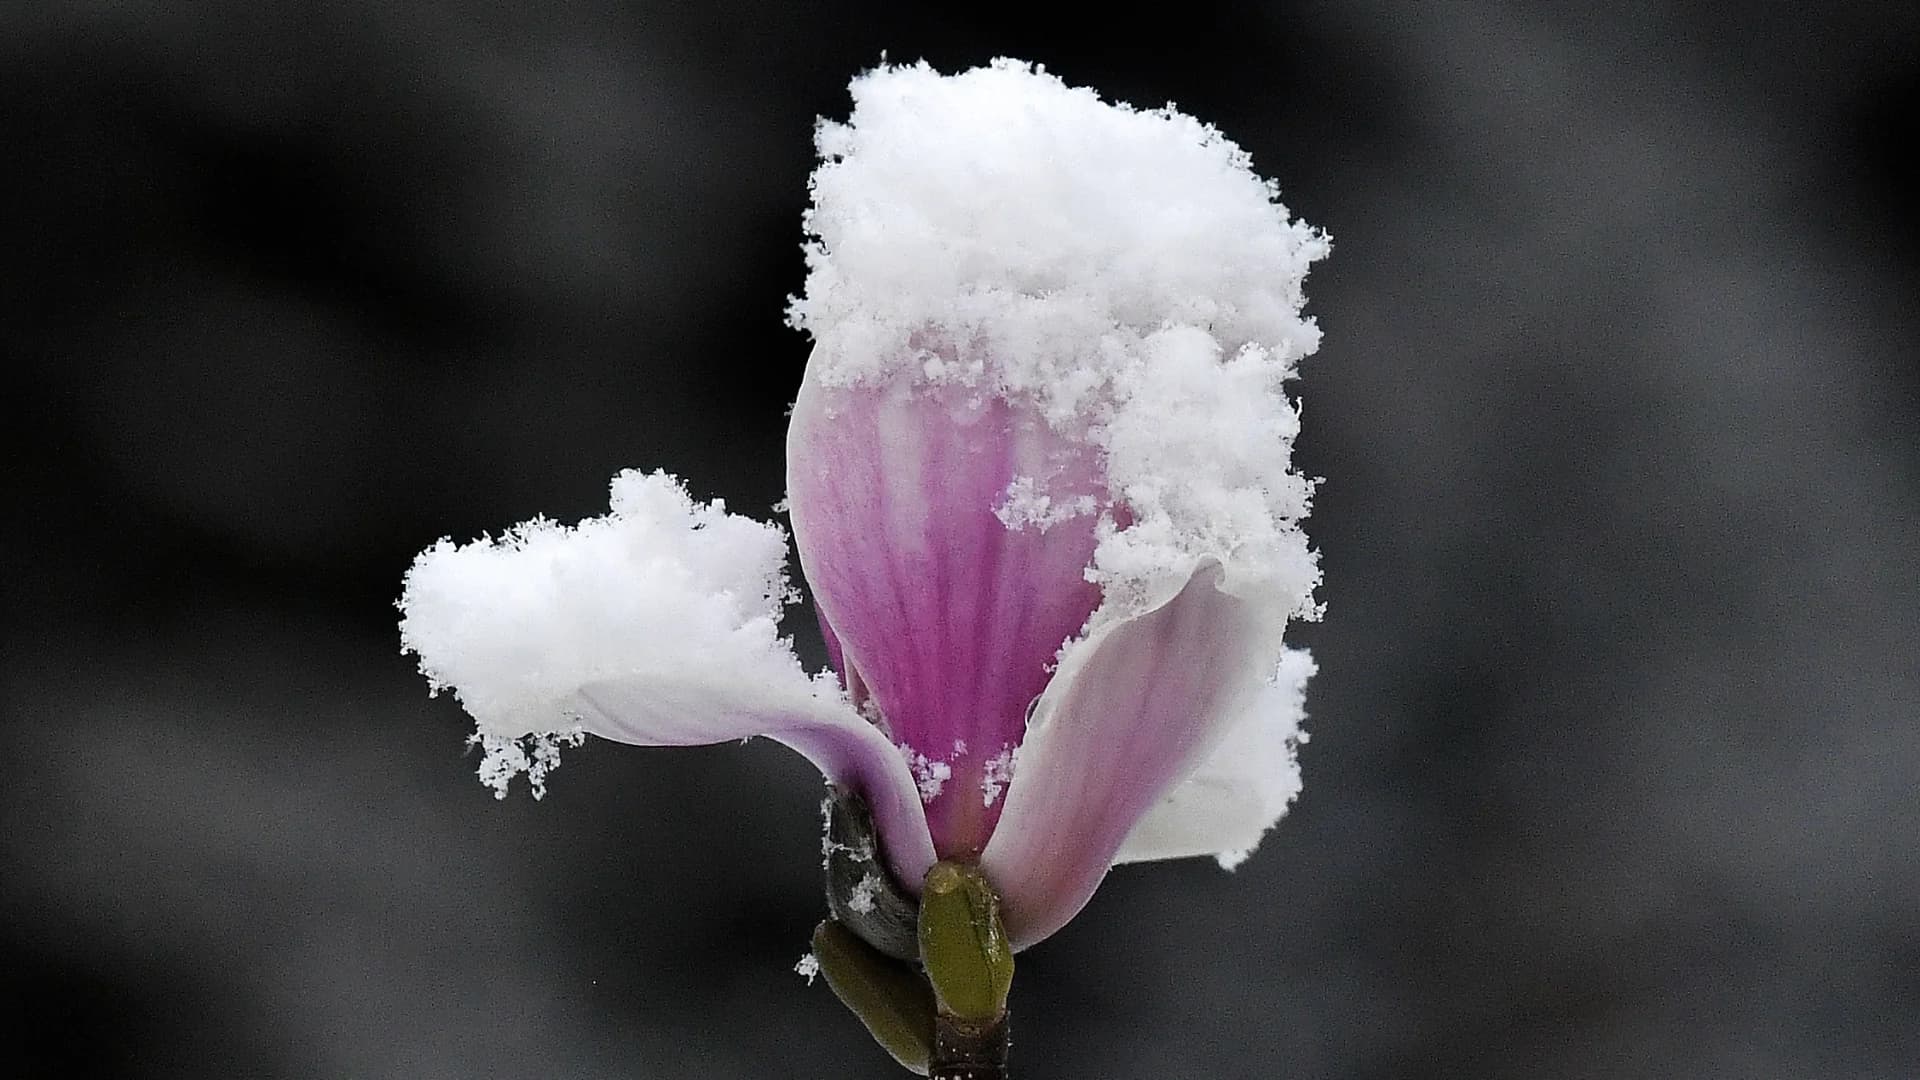 New research suggests spring is starting earlier